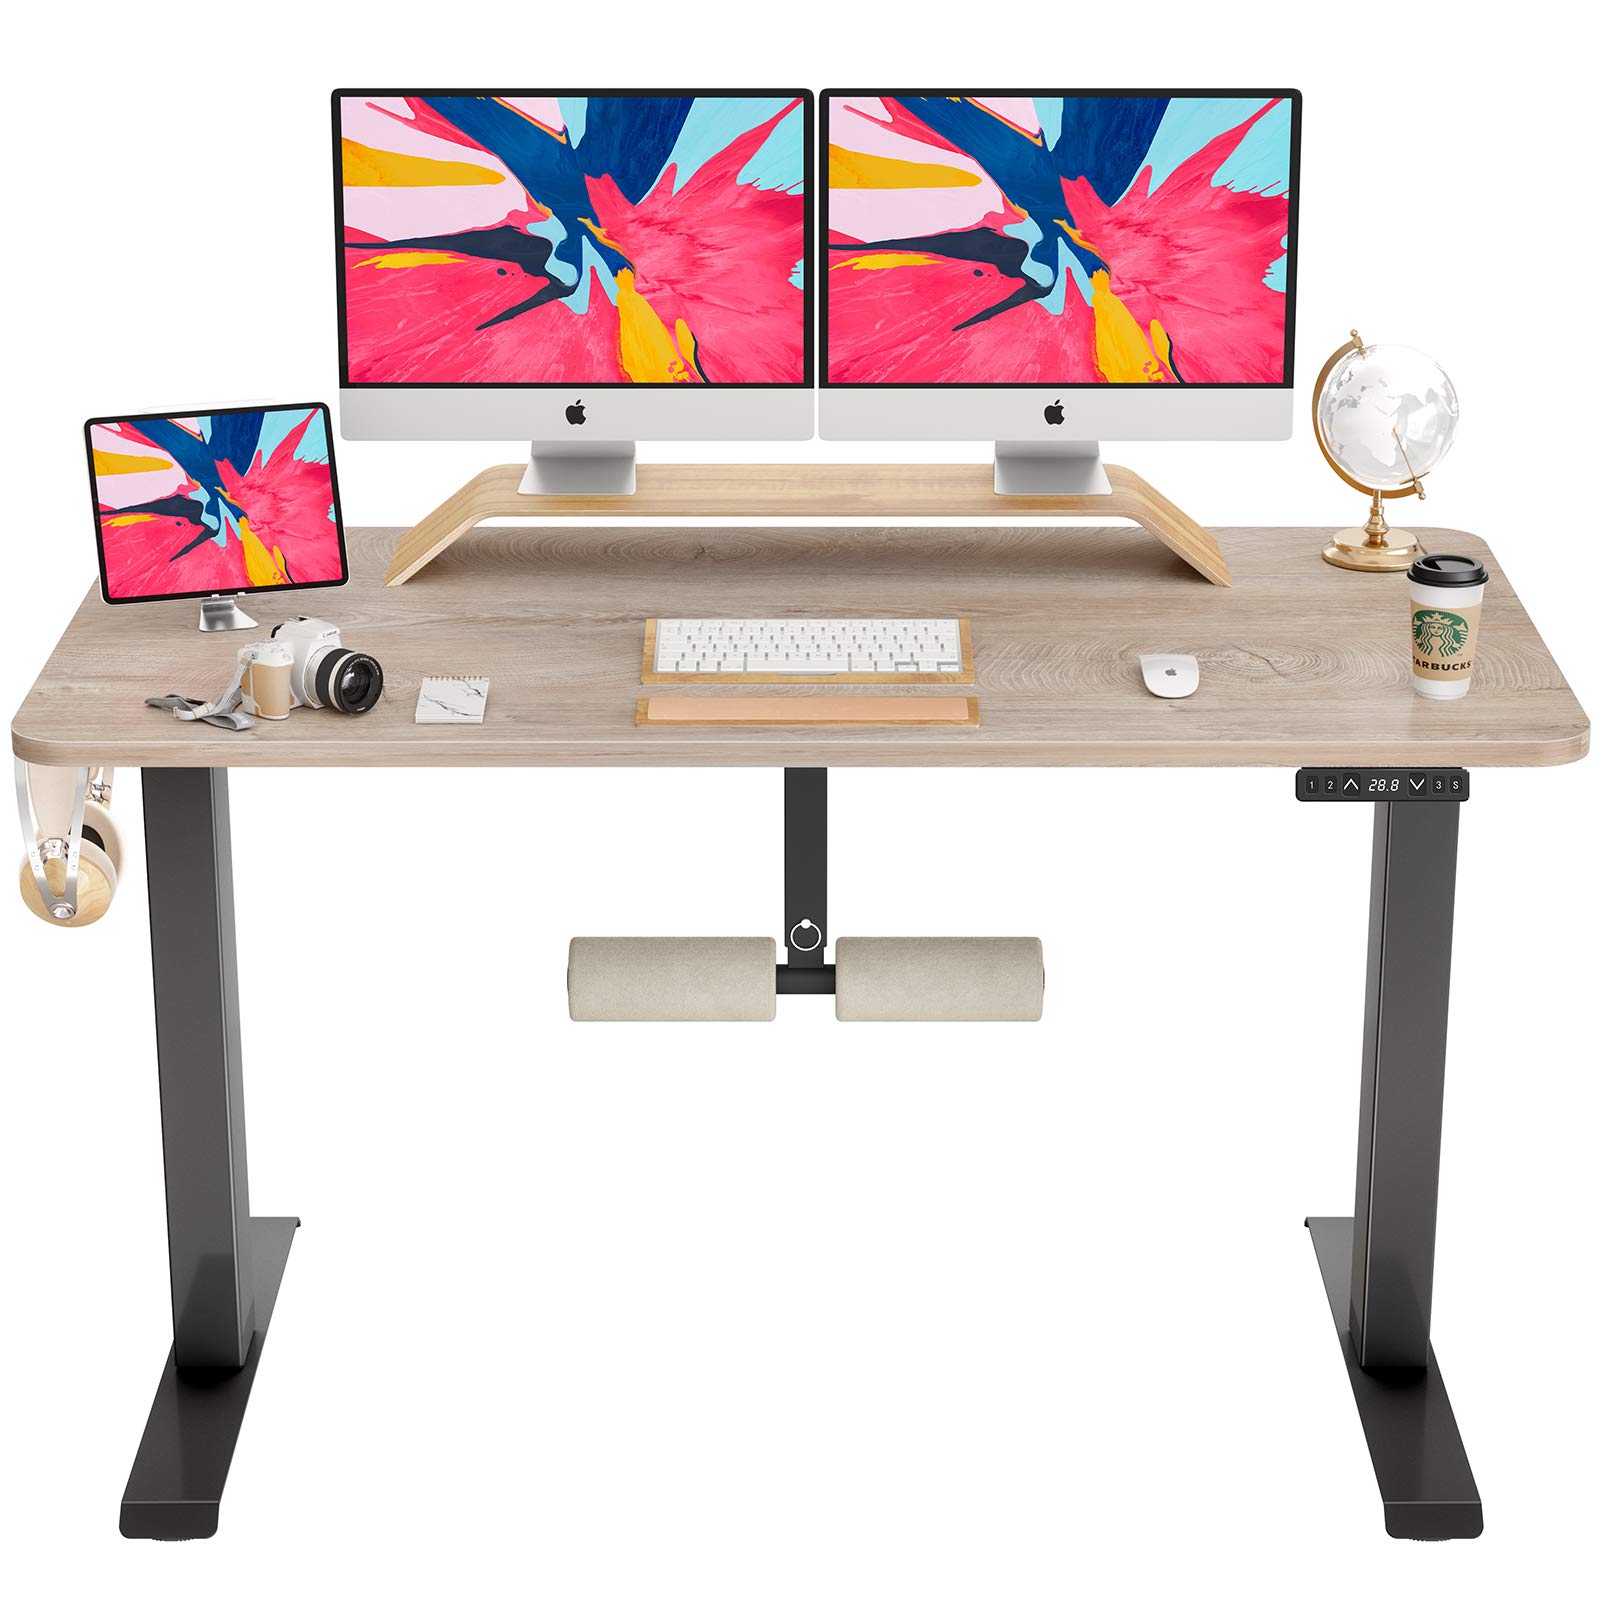 FAMISKY Standing Desk Dual Motors, Adjustable Height Electric Stand up Desk with Footrest, 55 x 24 Inches Sit Stand Home Office Desk, Ergonomic Wor...